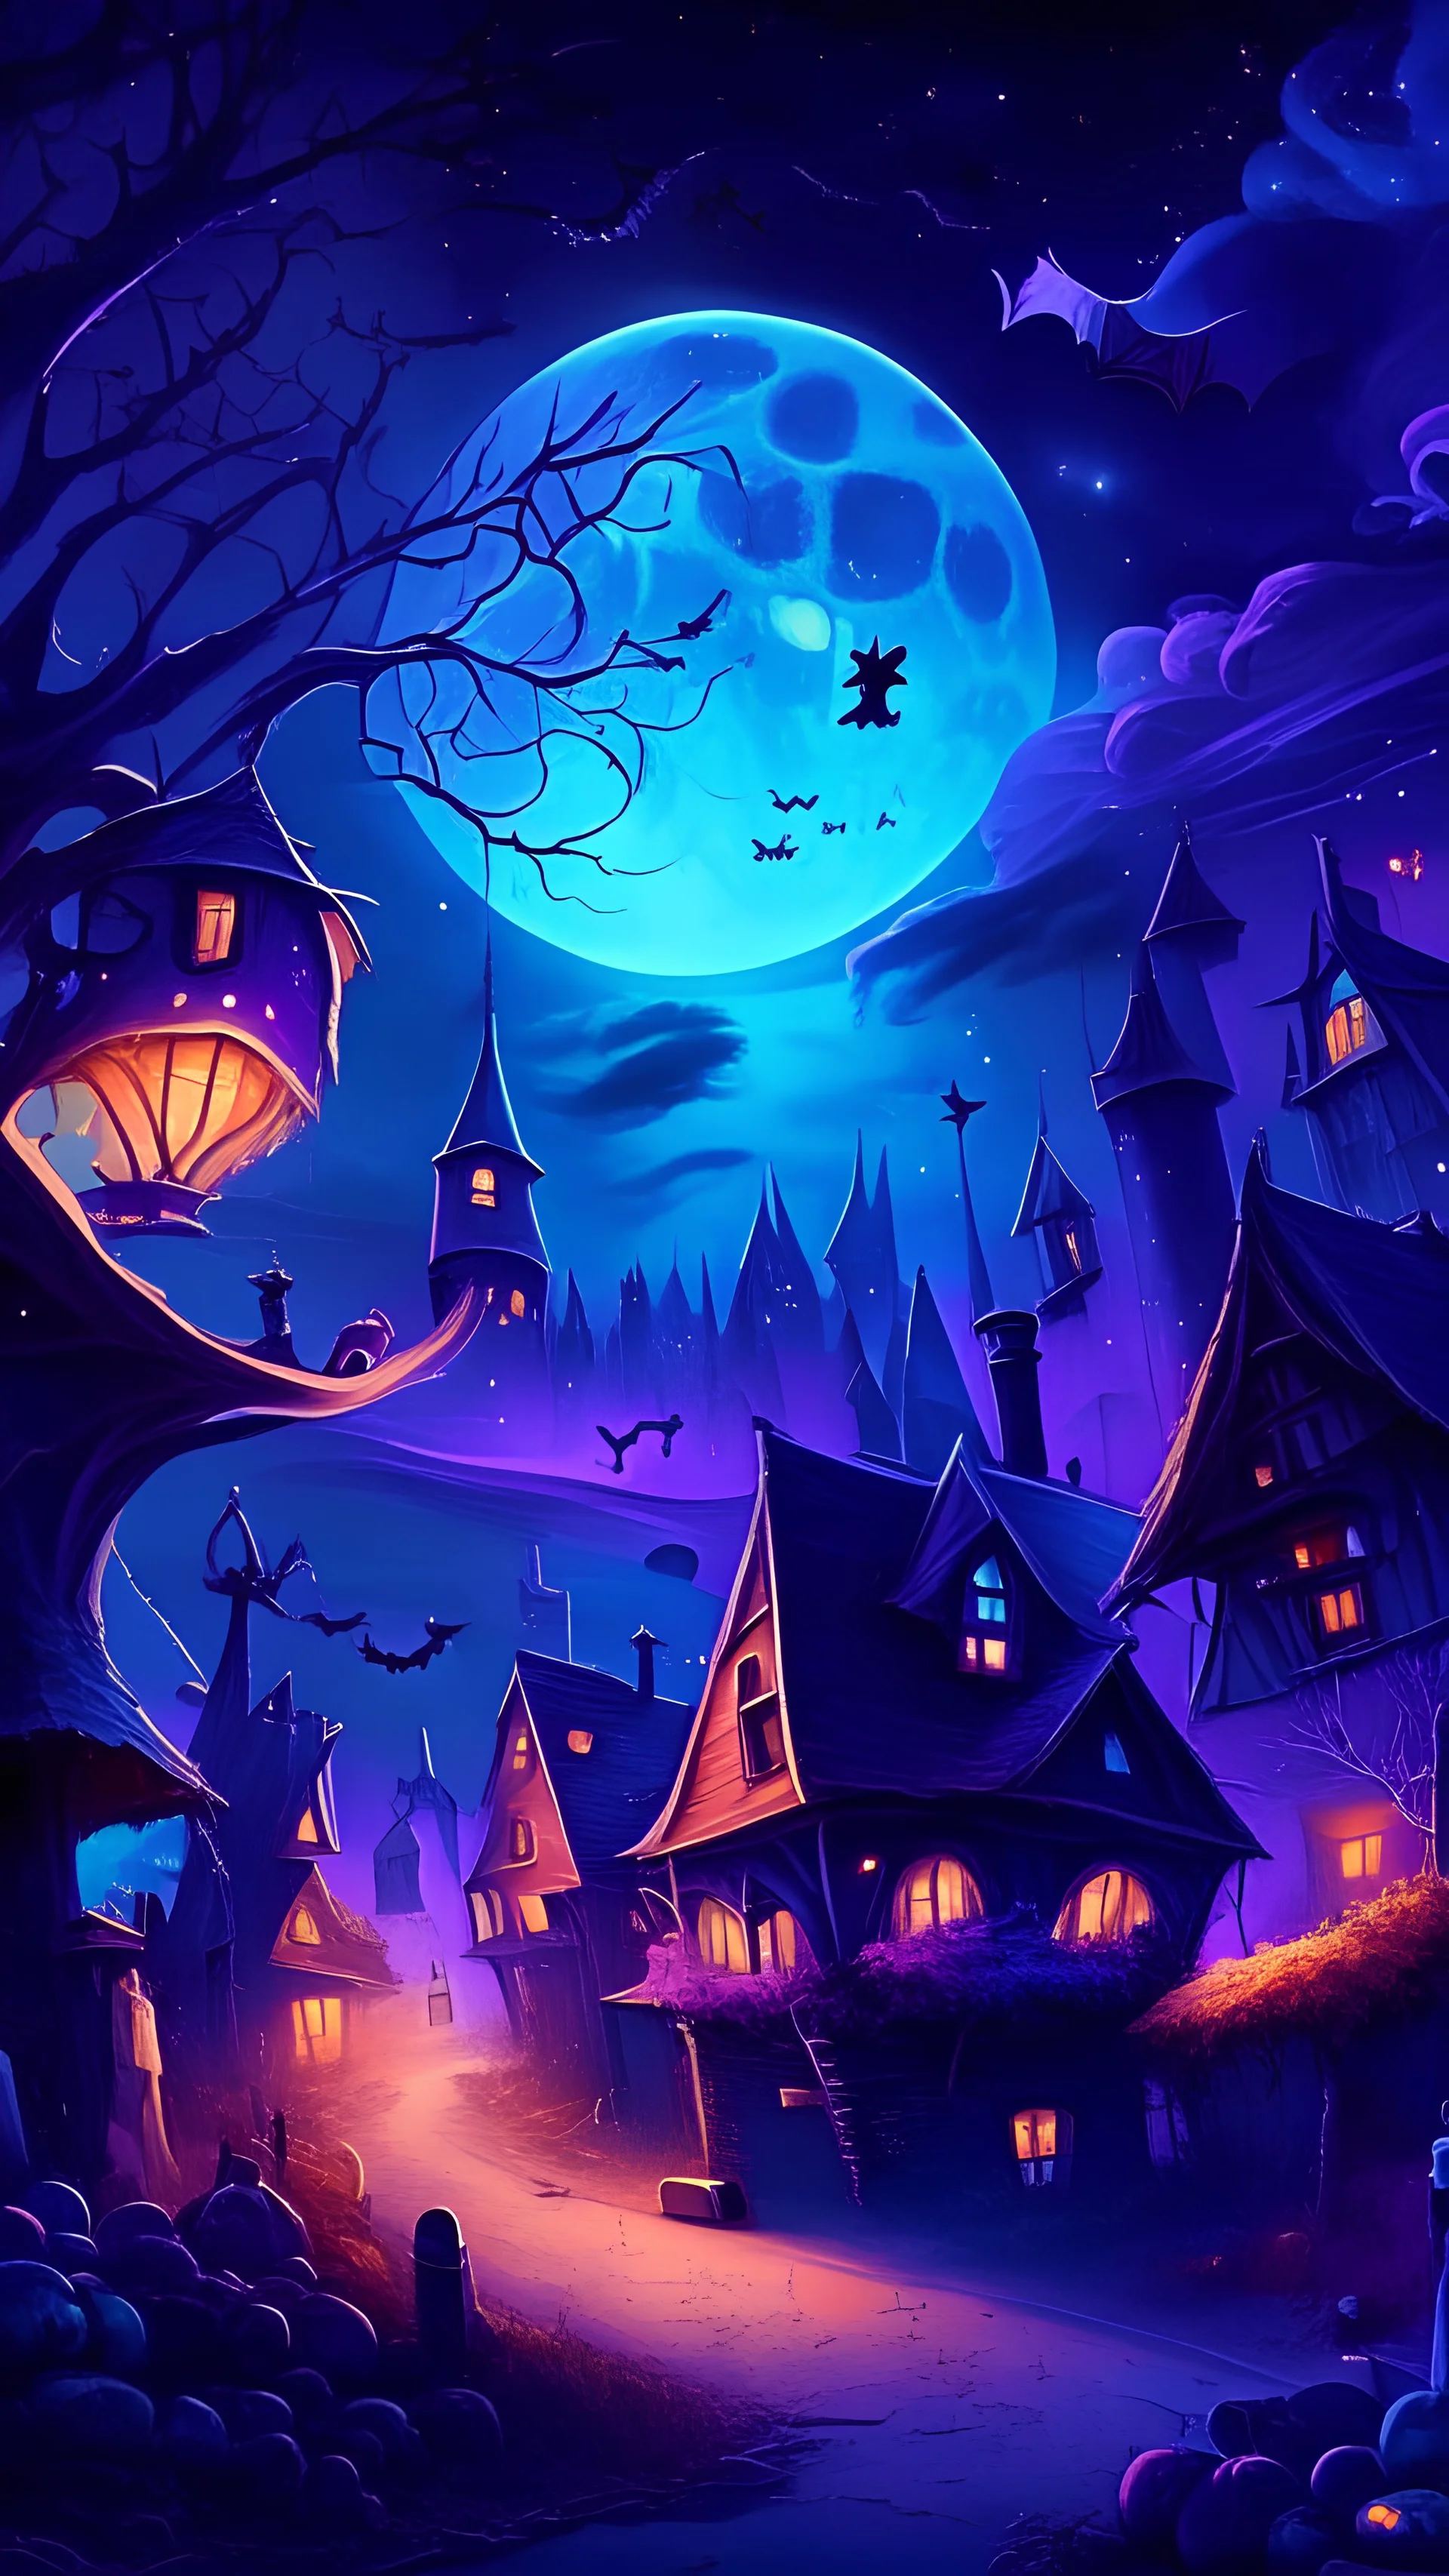 A beautiful village with Halloween decorations and cosmic sky with blue and purple colors